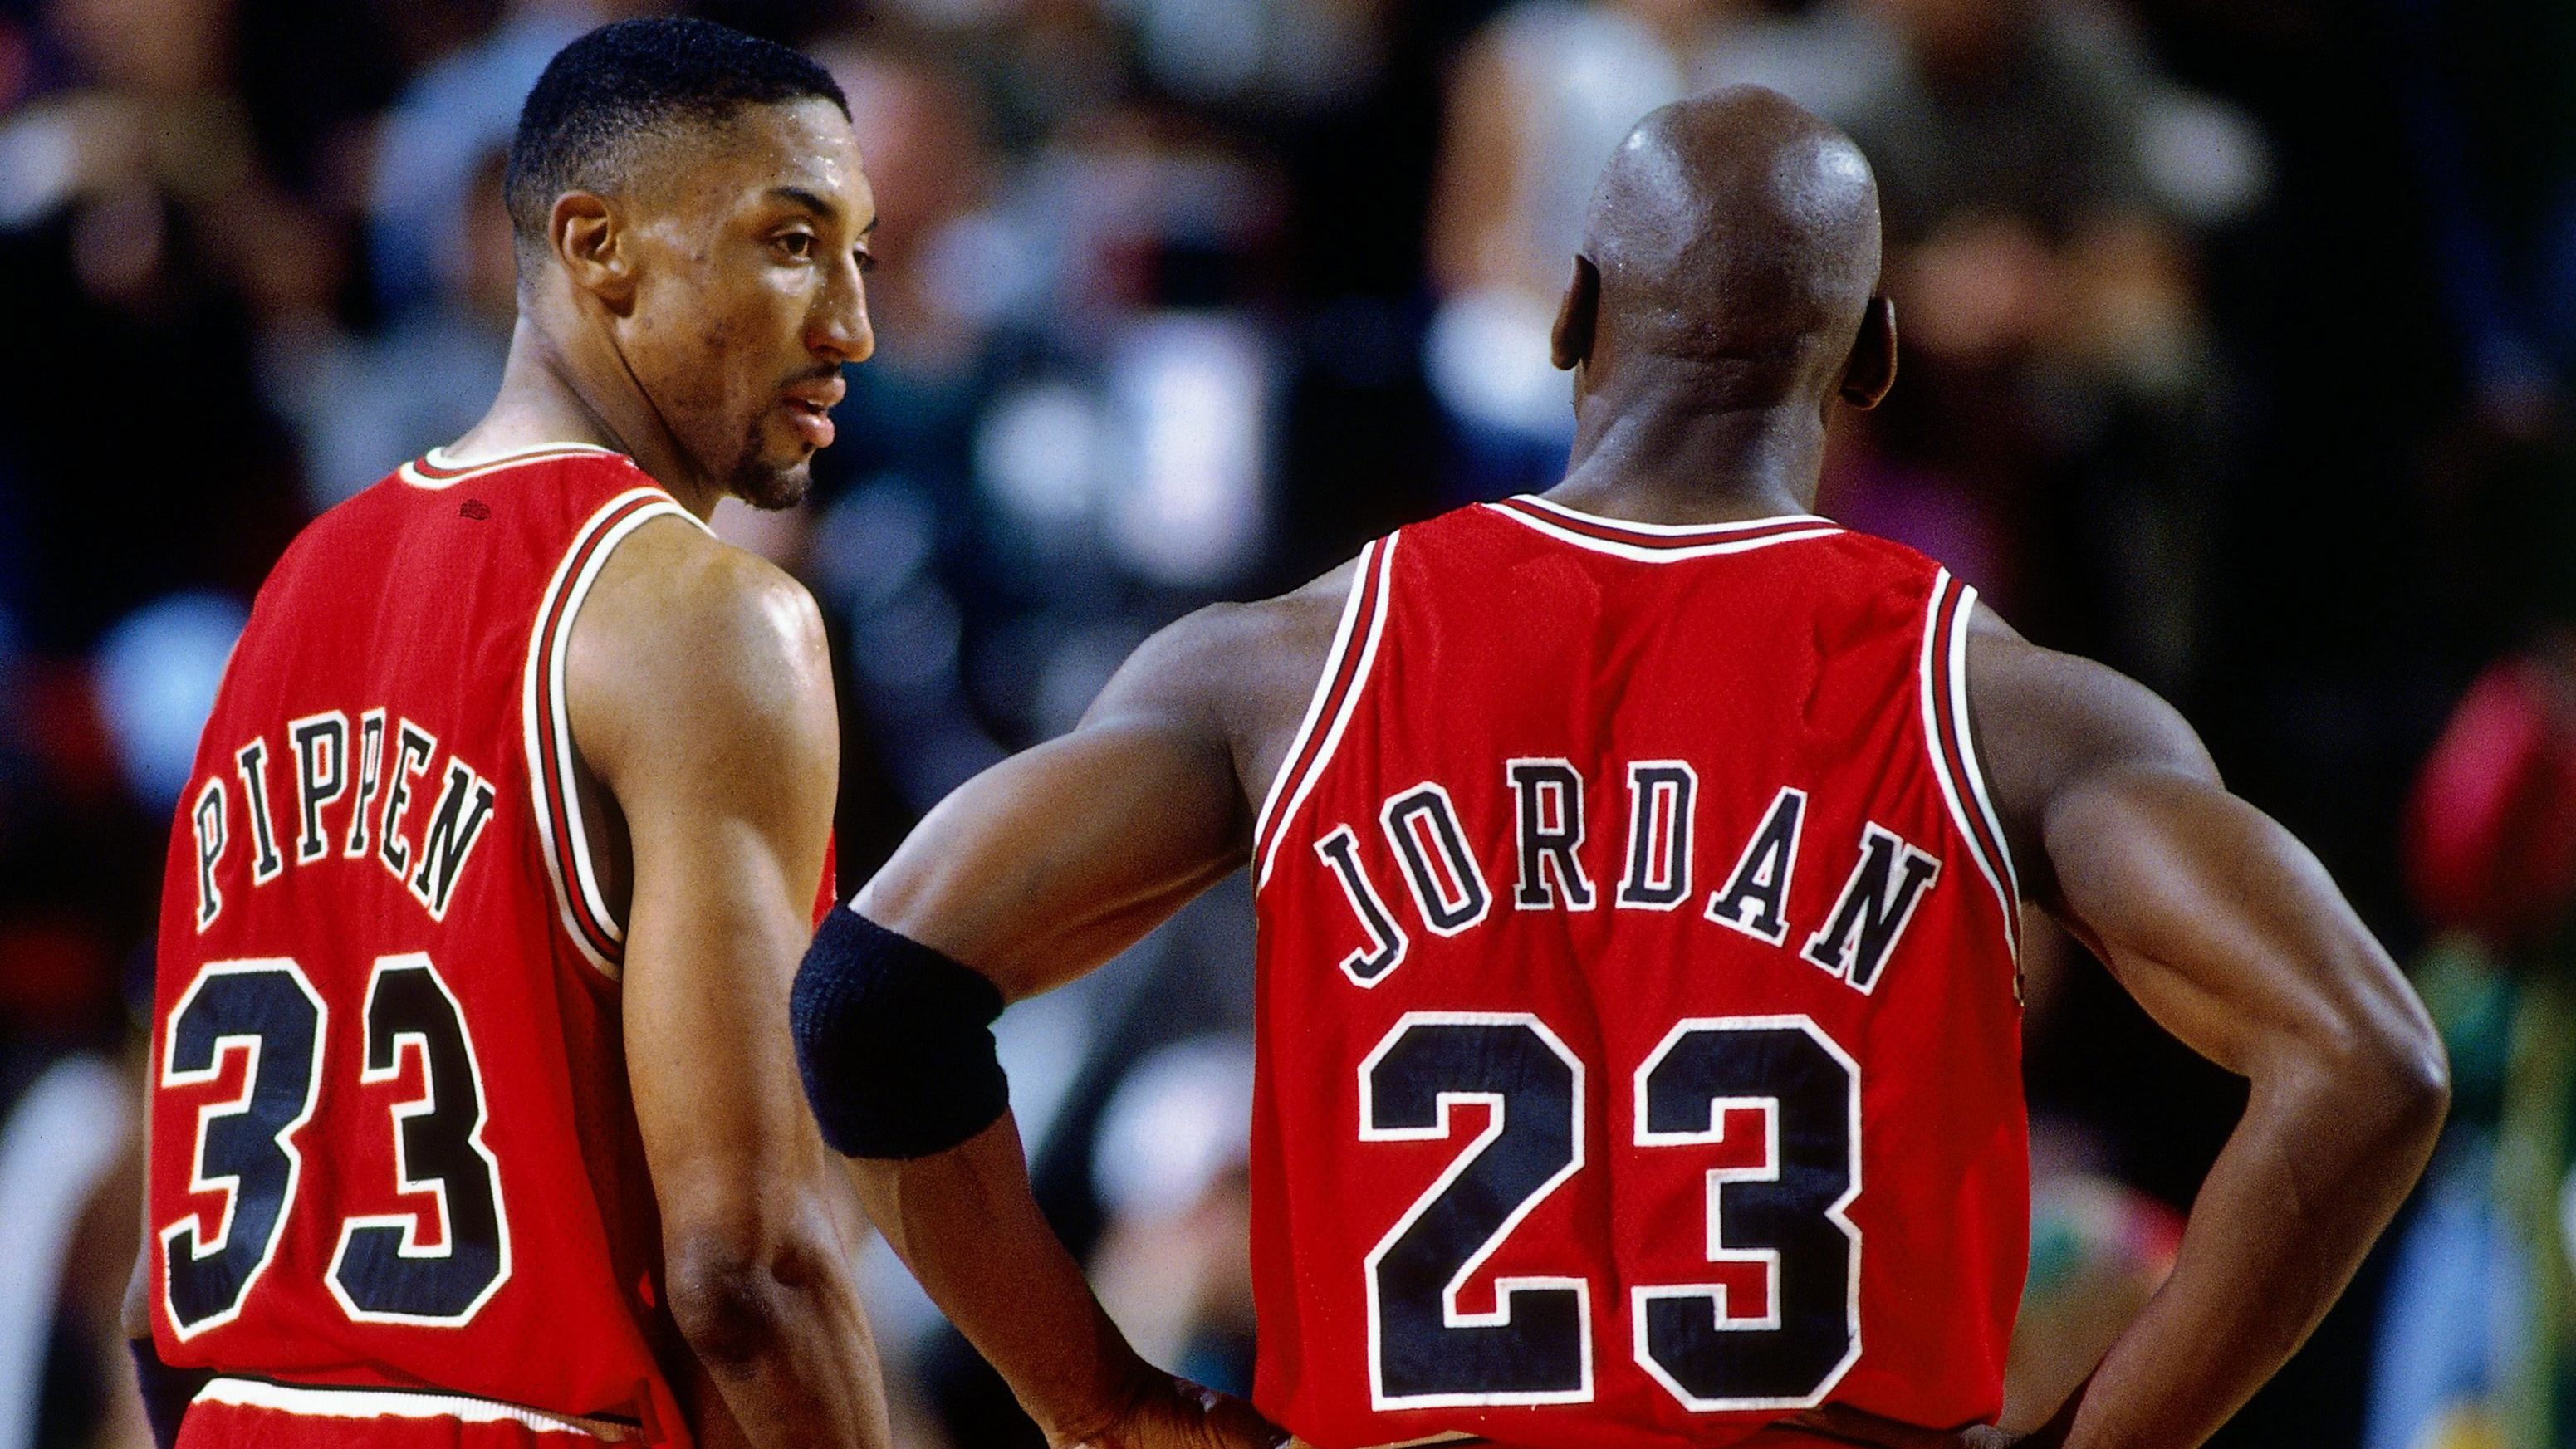 SEATTLE - JUNE 14:  Michael Jordan #23 and Scottie Pippen #33 of the Chicago Bulls discuss strategy against the Seattle SuperSonics in Game Five of the 1996 NBA Finals at Key Arena on June 14, 1996 in Seattle, Washington. The Sonics won 89-78.  NOTE TO USER: User expressly acknowledges that, by downloading and or using this photograph, User is consenting to the terms and conditions of the Getty Images License agreement. Mandatory Copyright Notice: Copyright 1996 NBAE (Photo by Barry Gossage/NBAE